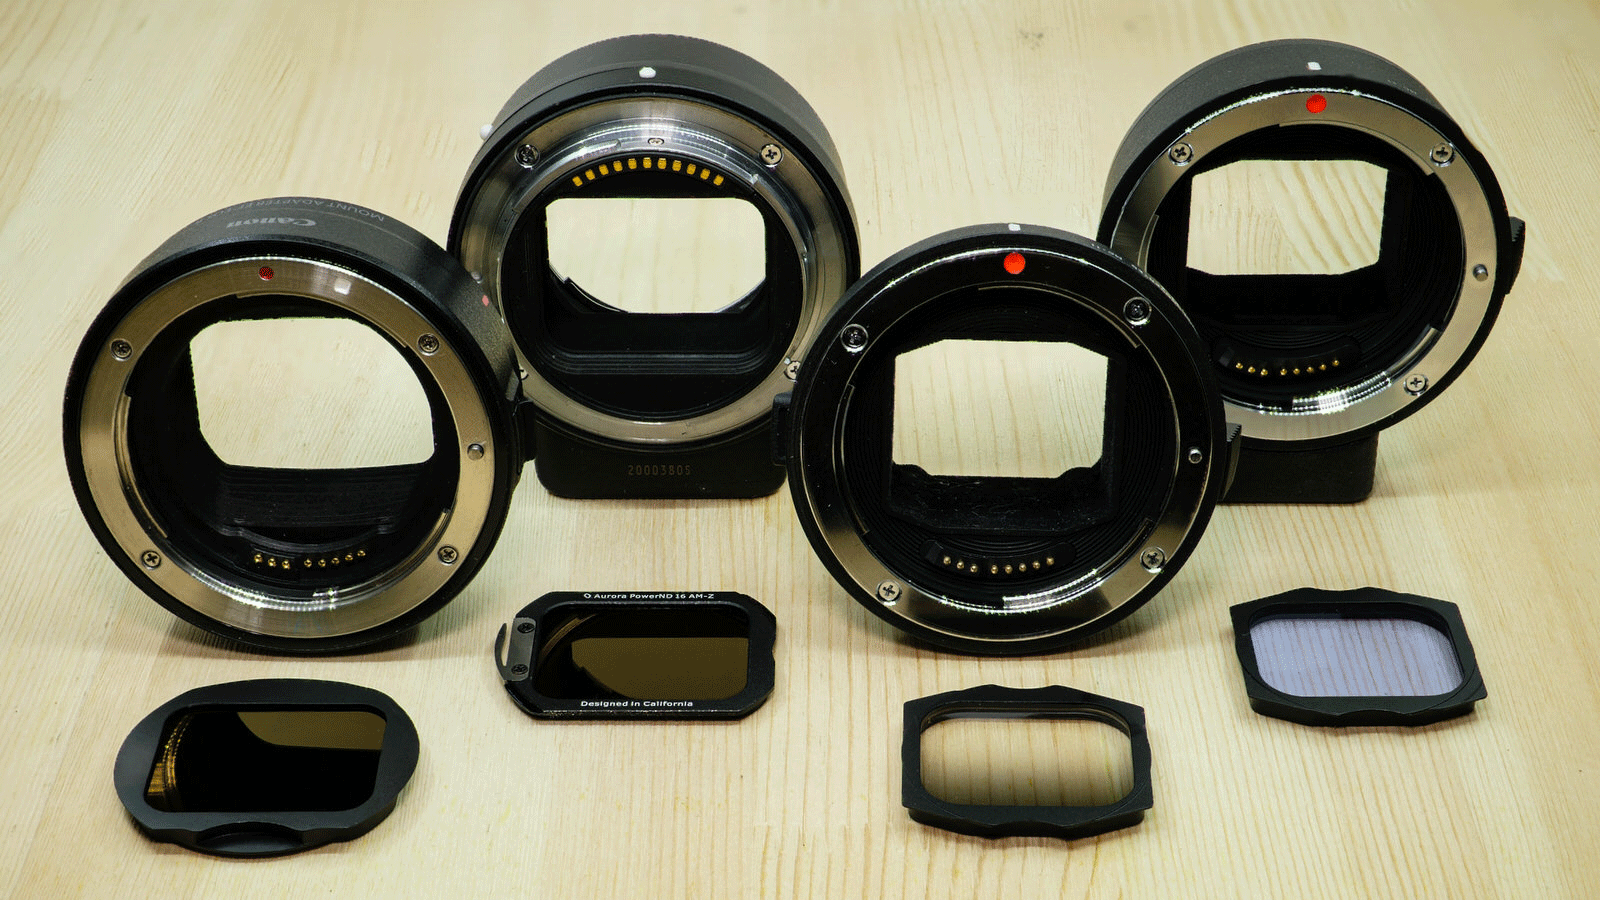 Check out These Painless Drop-In Lens Filters for Mirrorless Cameras